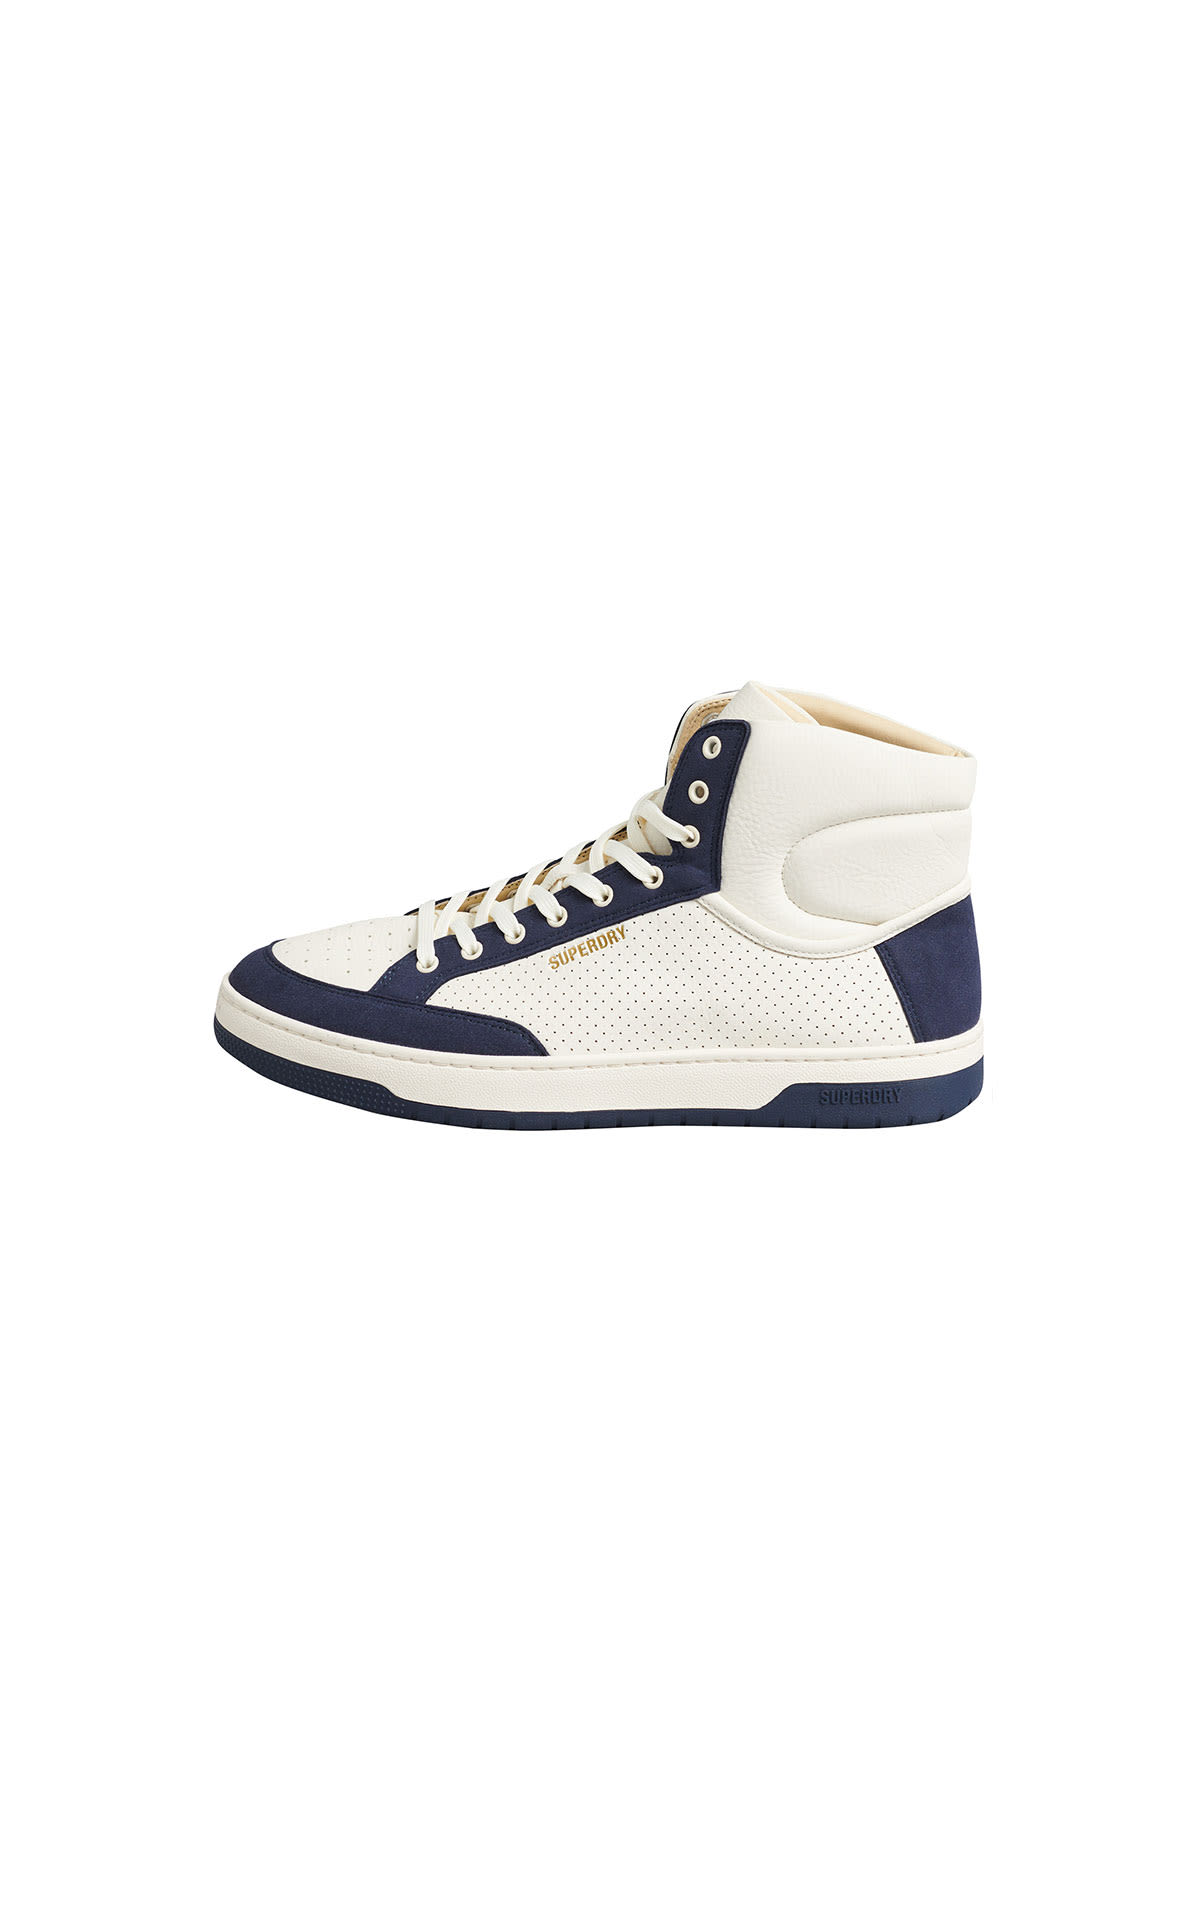 Superdry Off white and navy trainers mens from Bicester Village